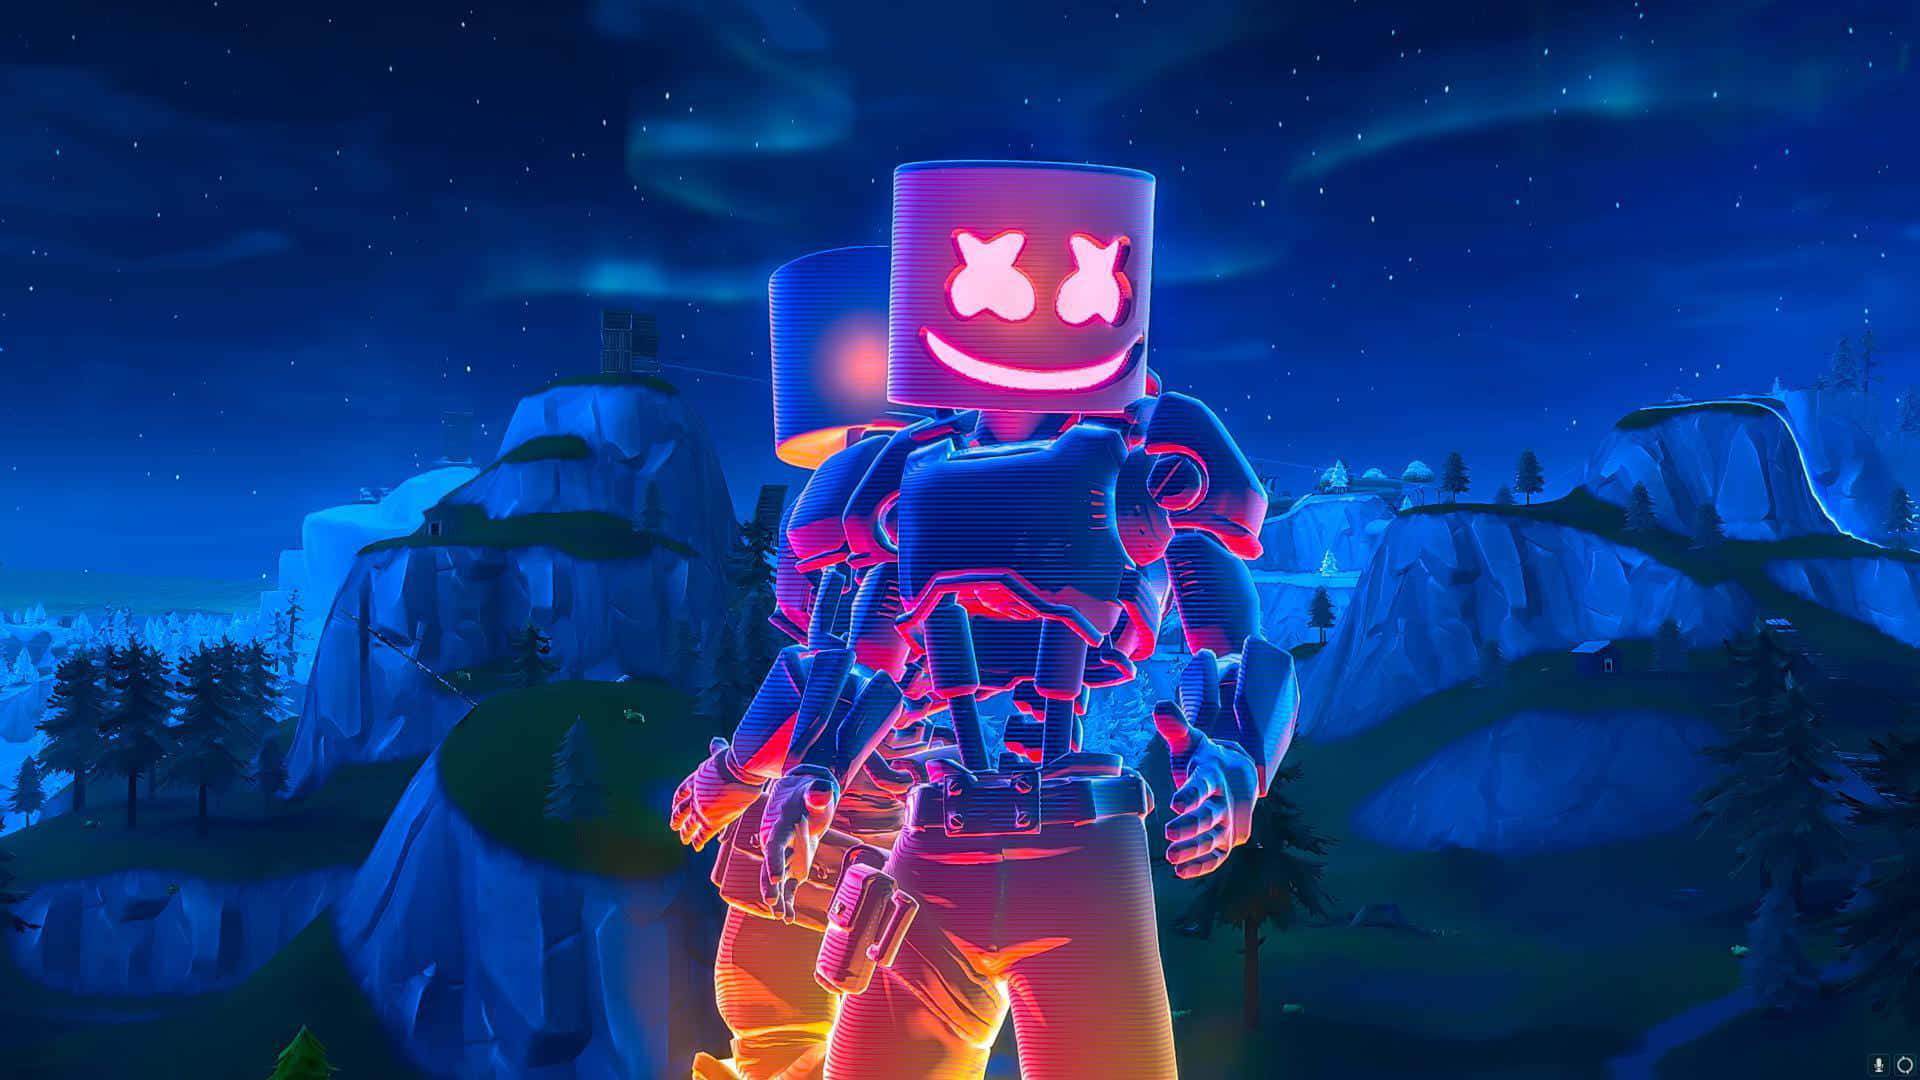 Join the Party with Fortnite's Marshmello! Wallpaper